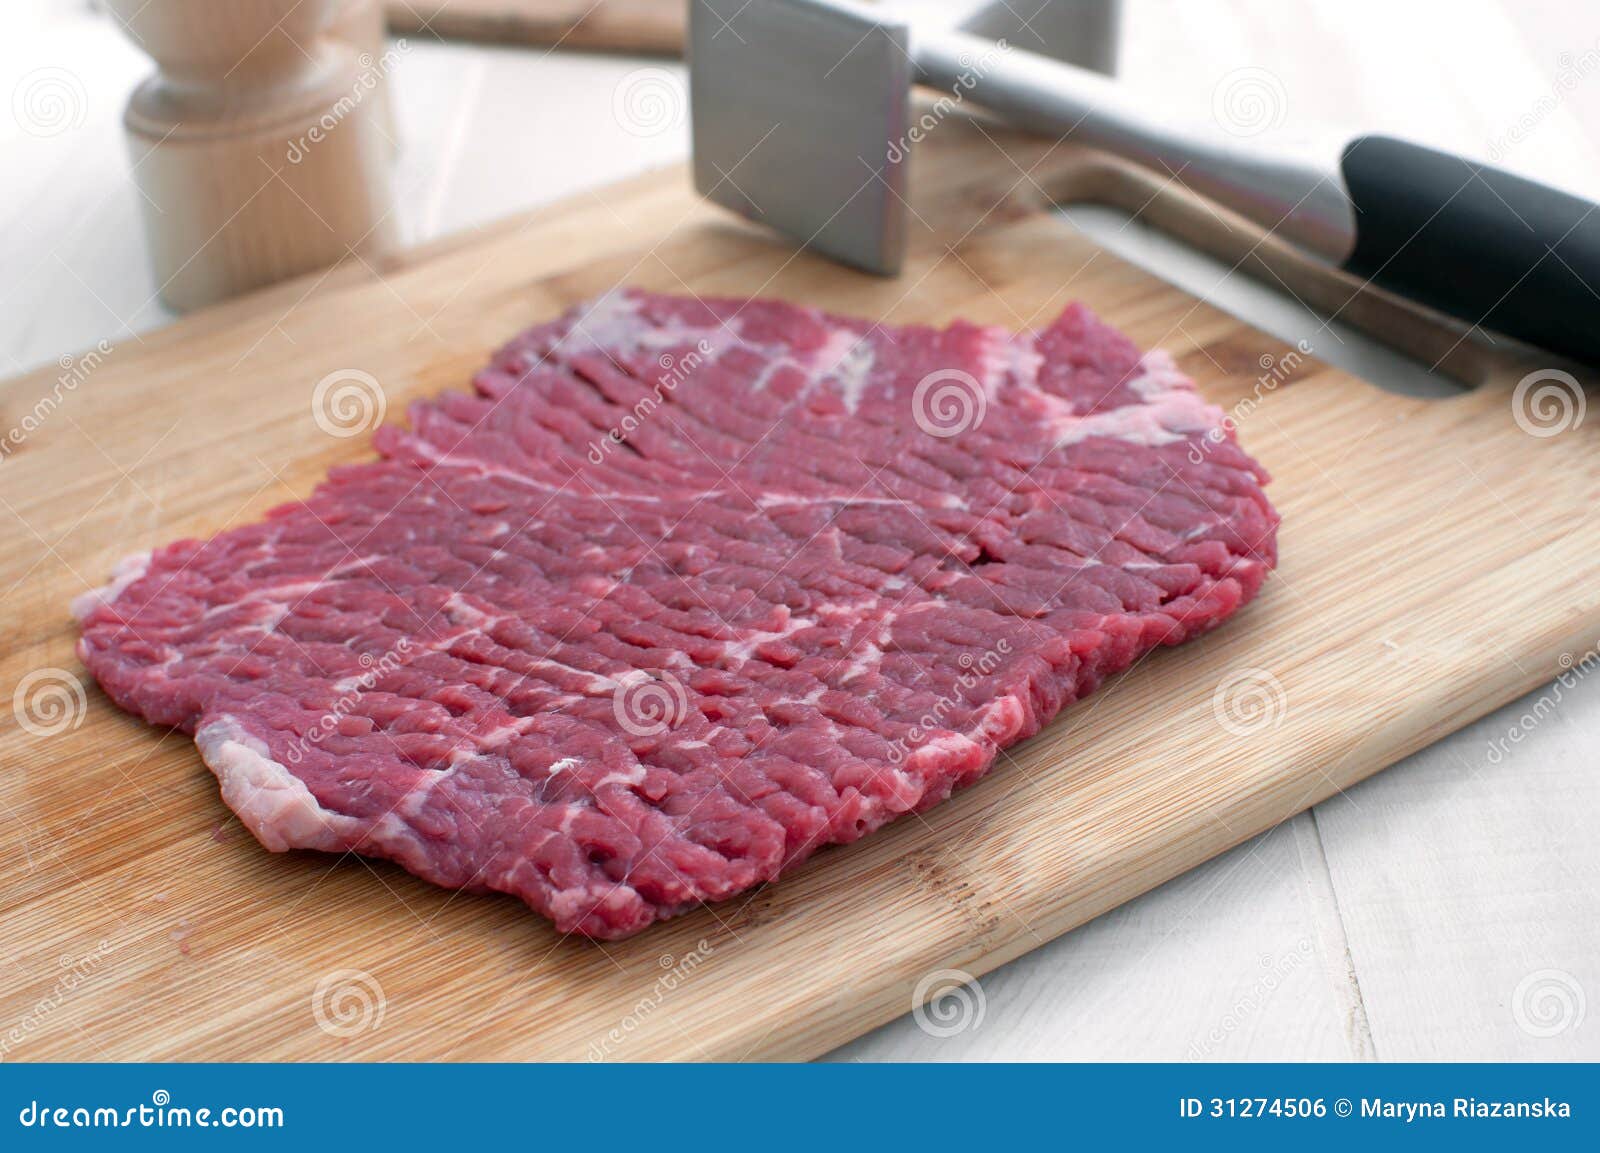 raw steak piece and meat pounder